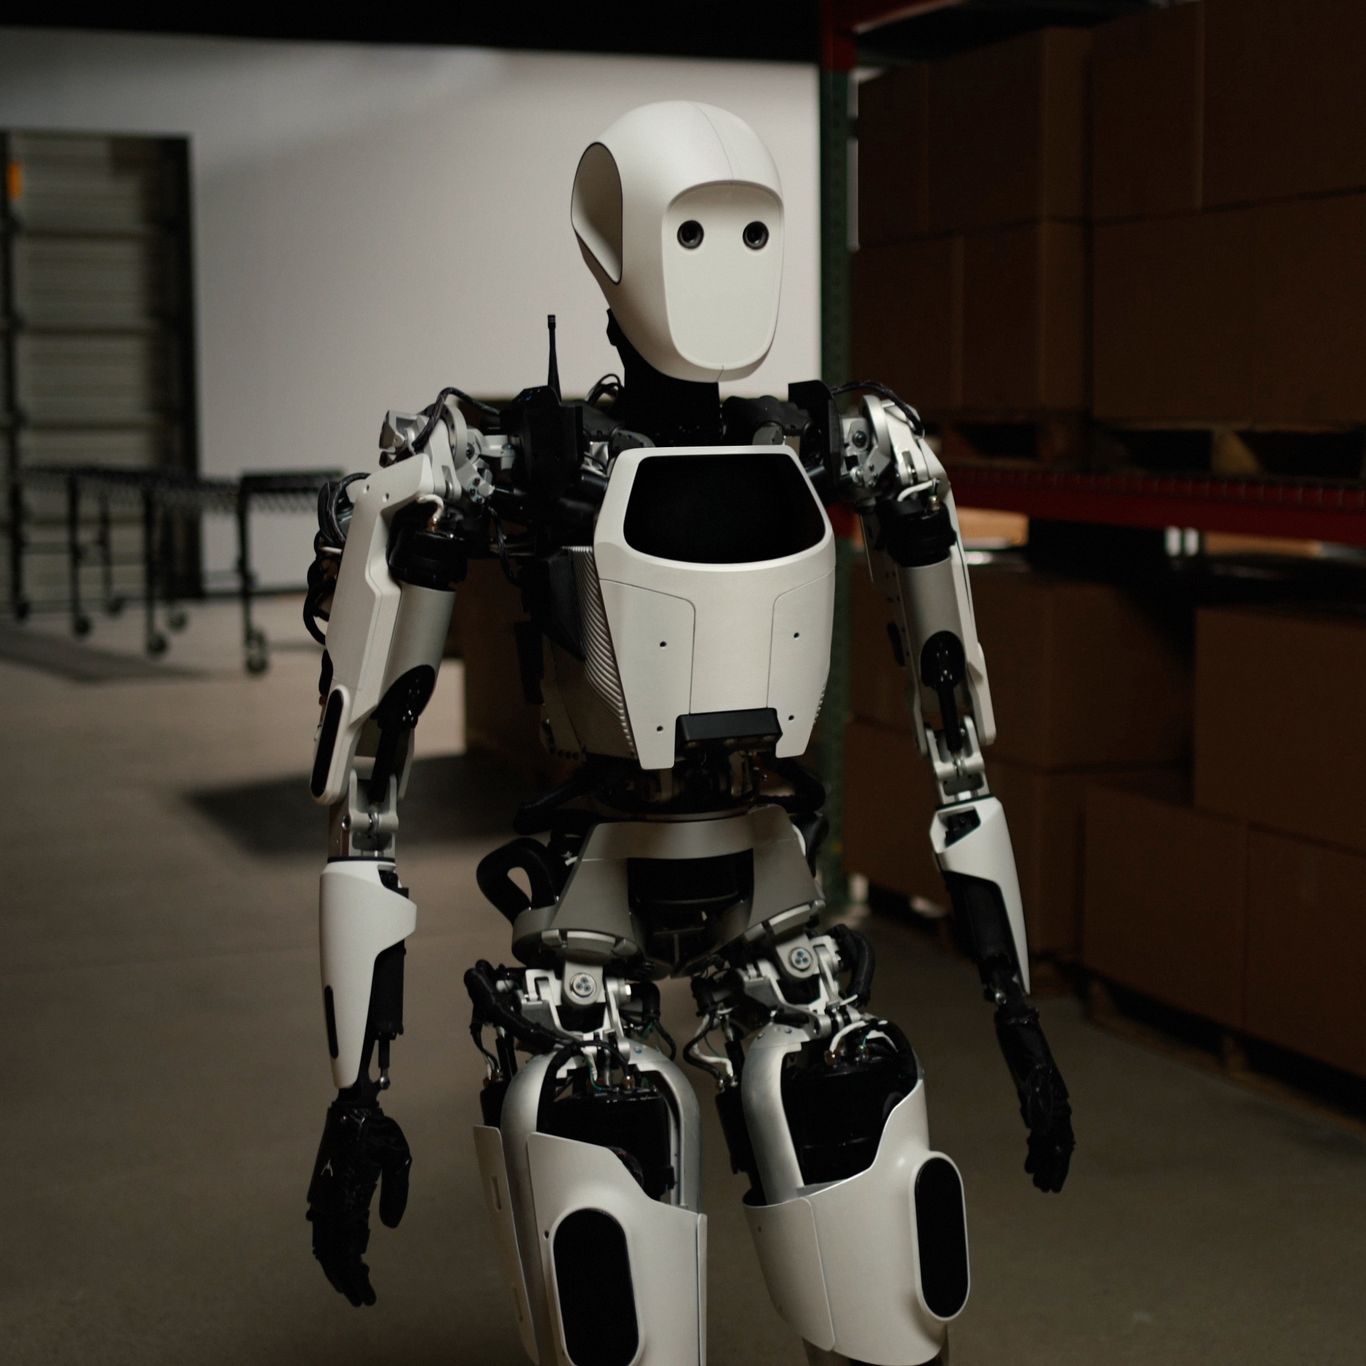 With new warehouse robots,  looks to invent its way out of